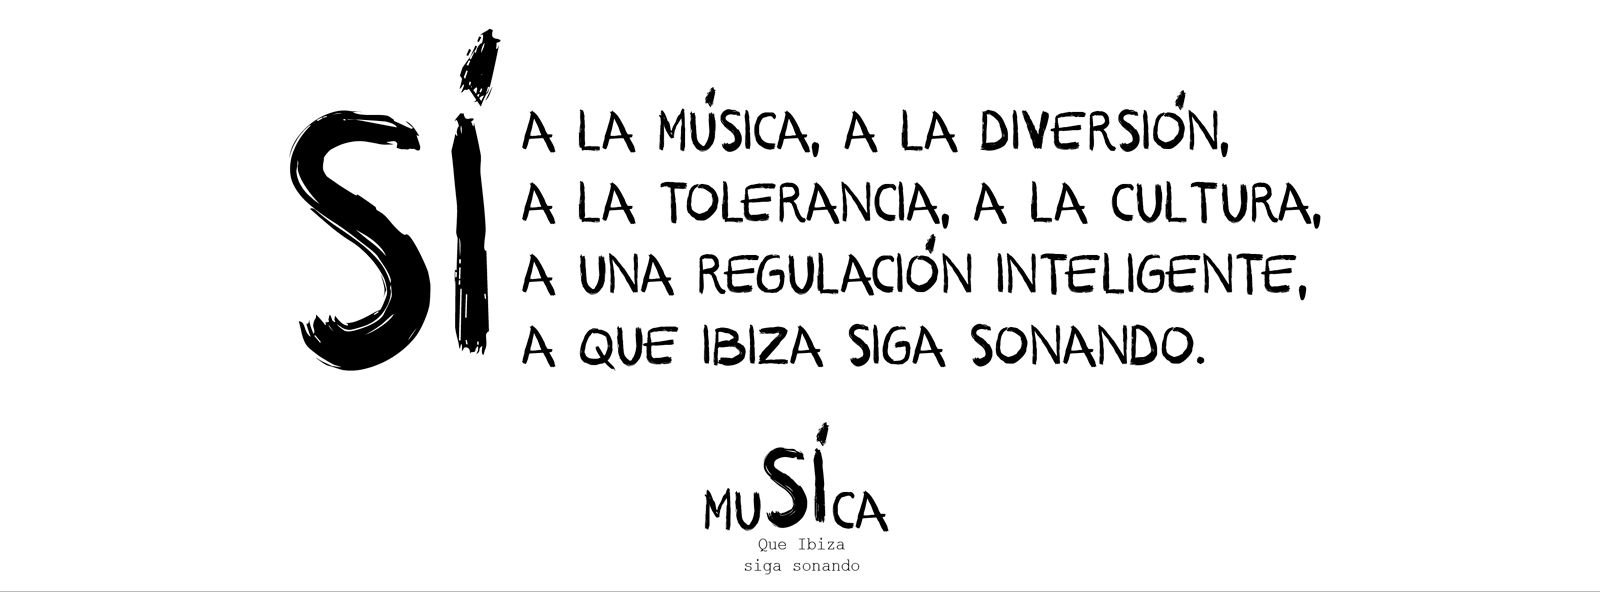 Freedom Of Music Movement For Ibiza